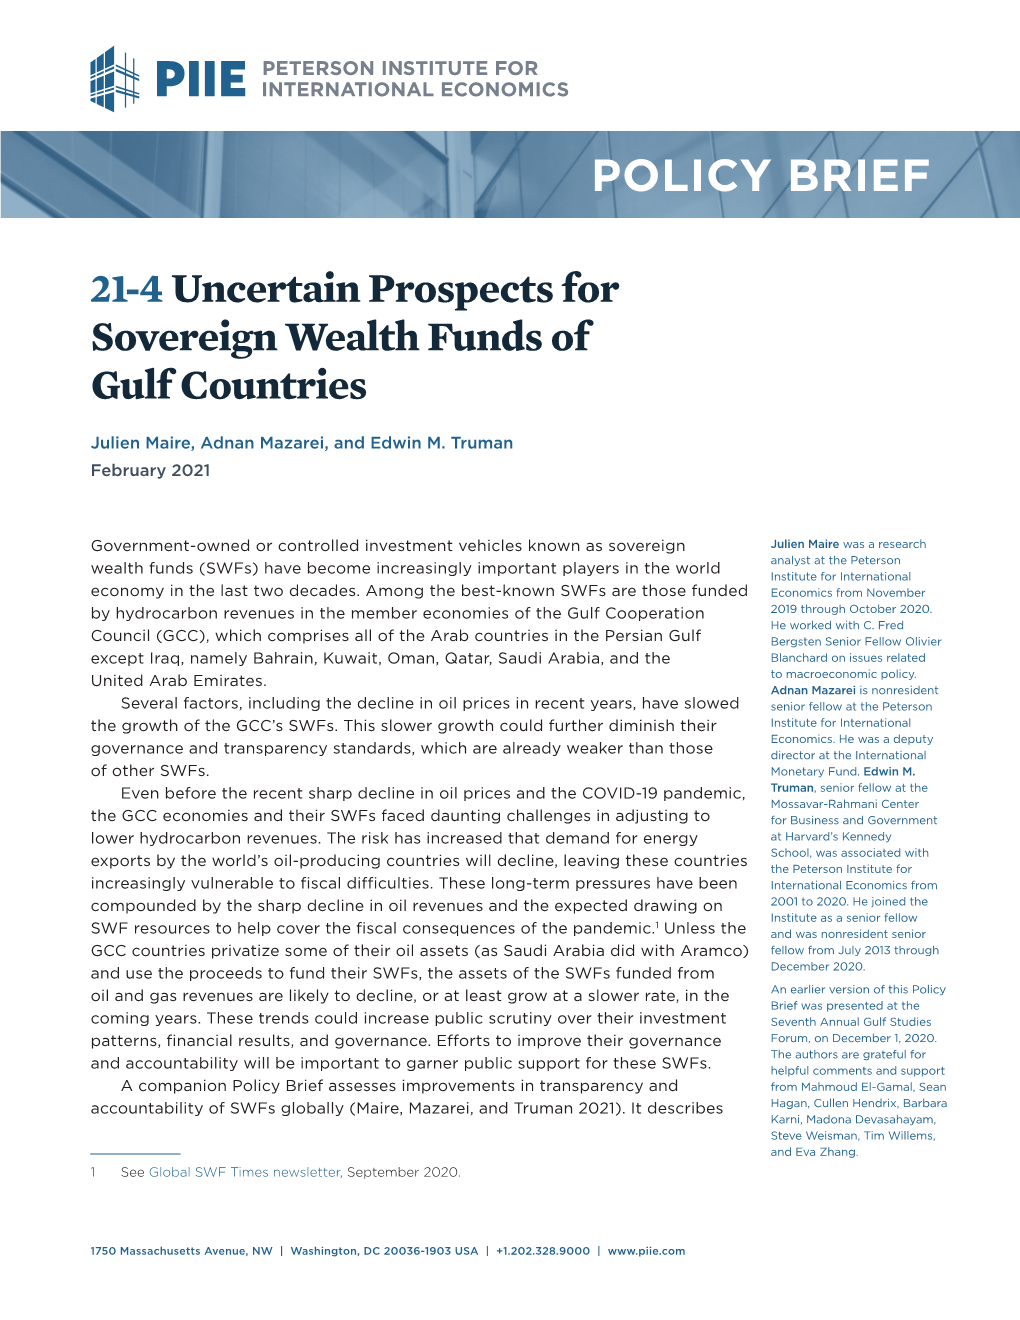 Uncertain Prospects for Sovereign Wealth Funds of Gulf Countries